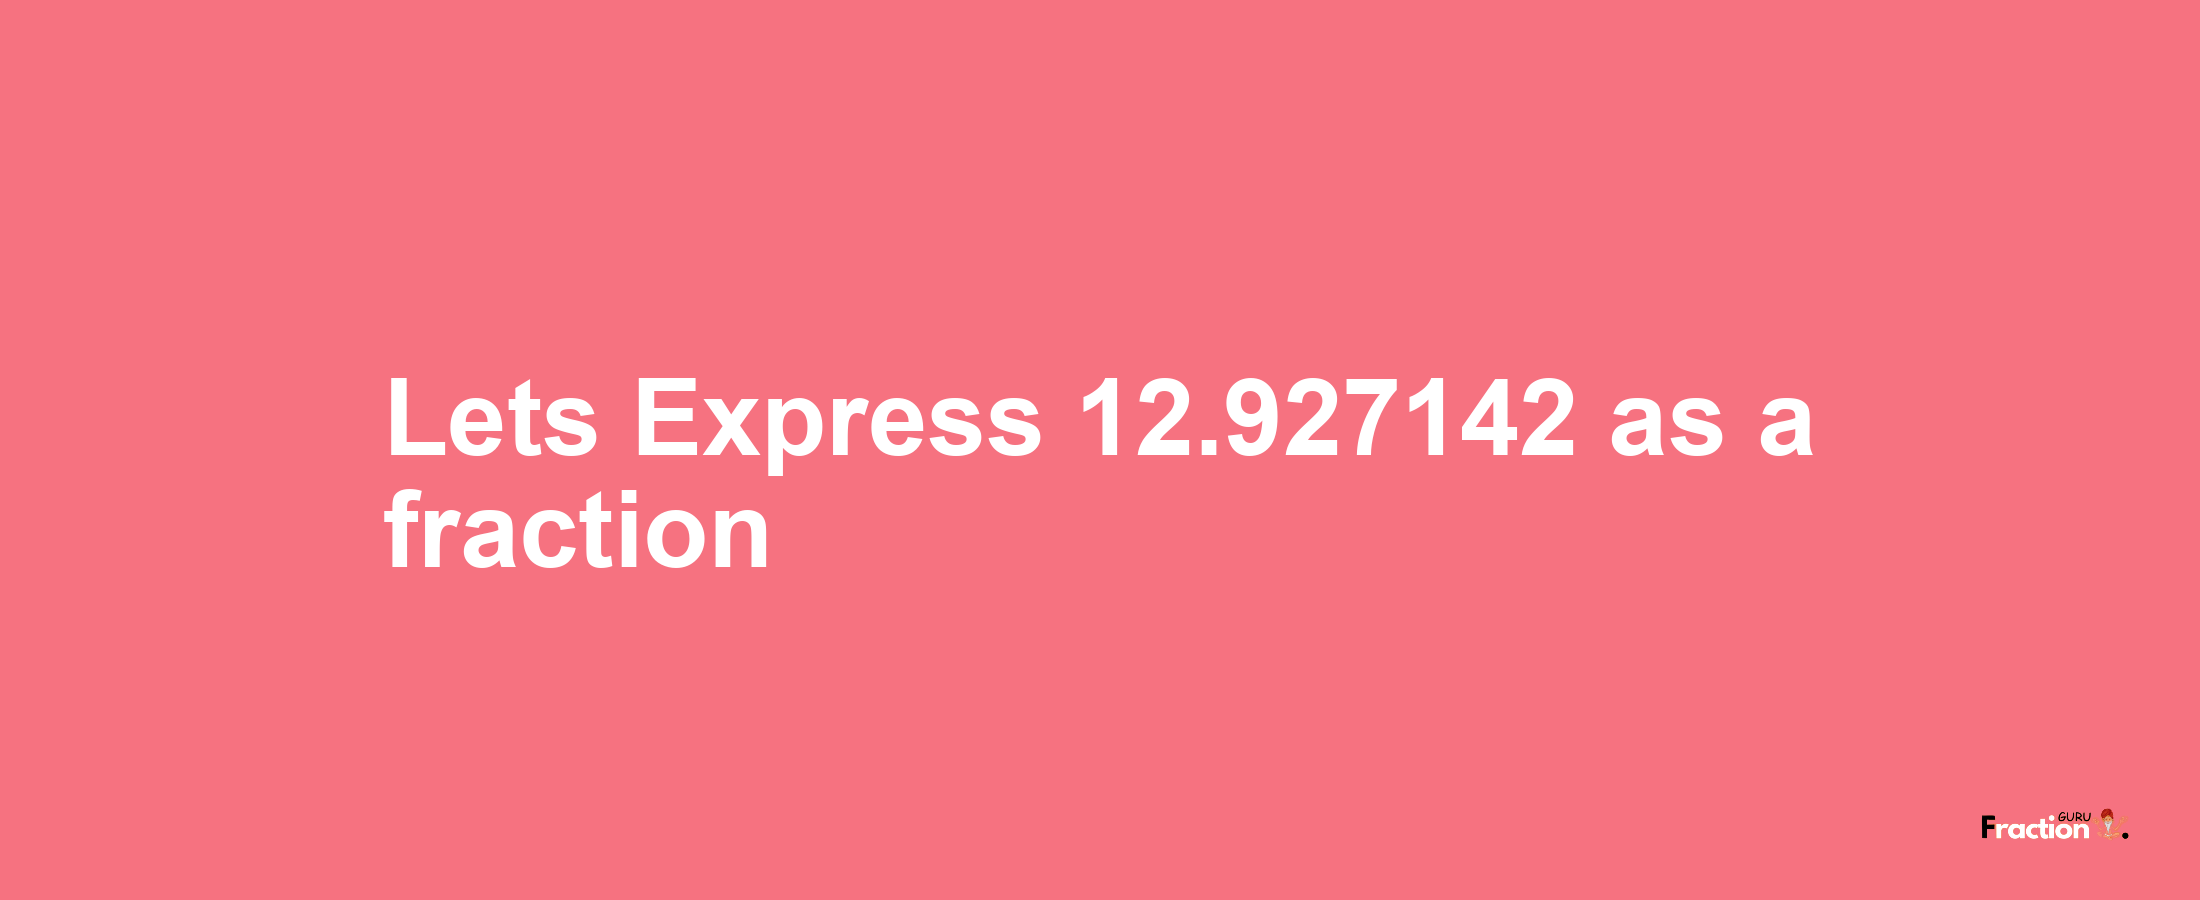 Lets Express 12.927142 as afraction